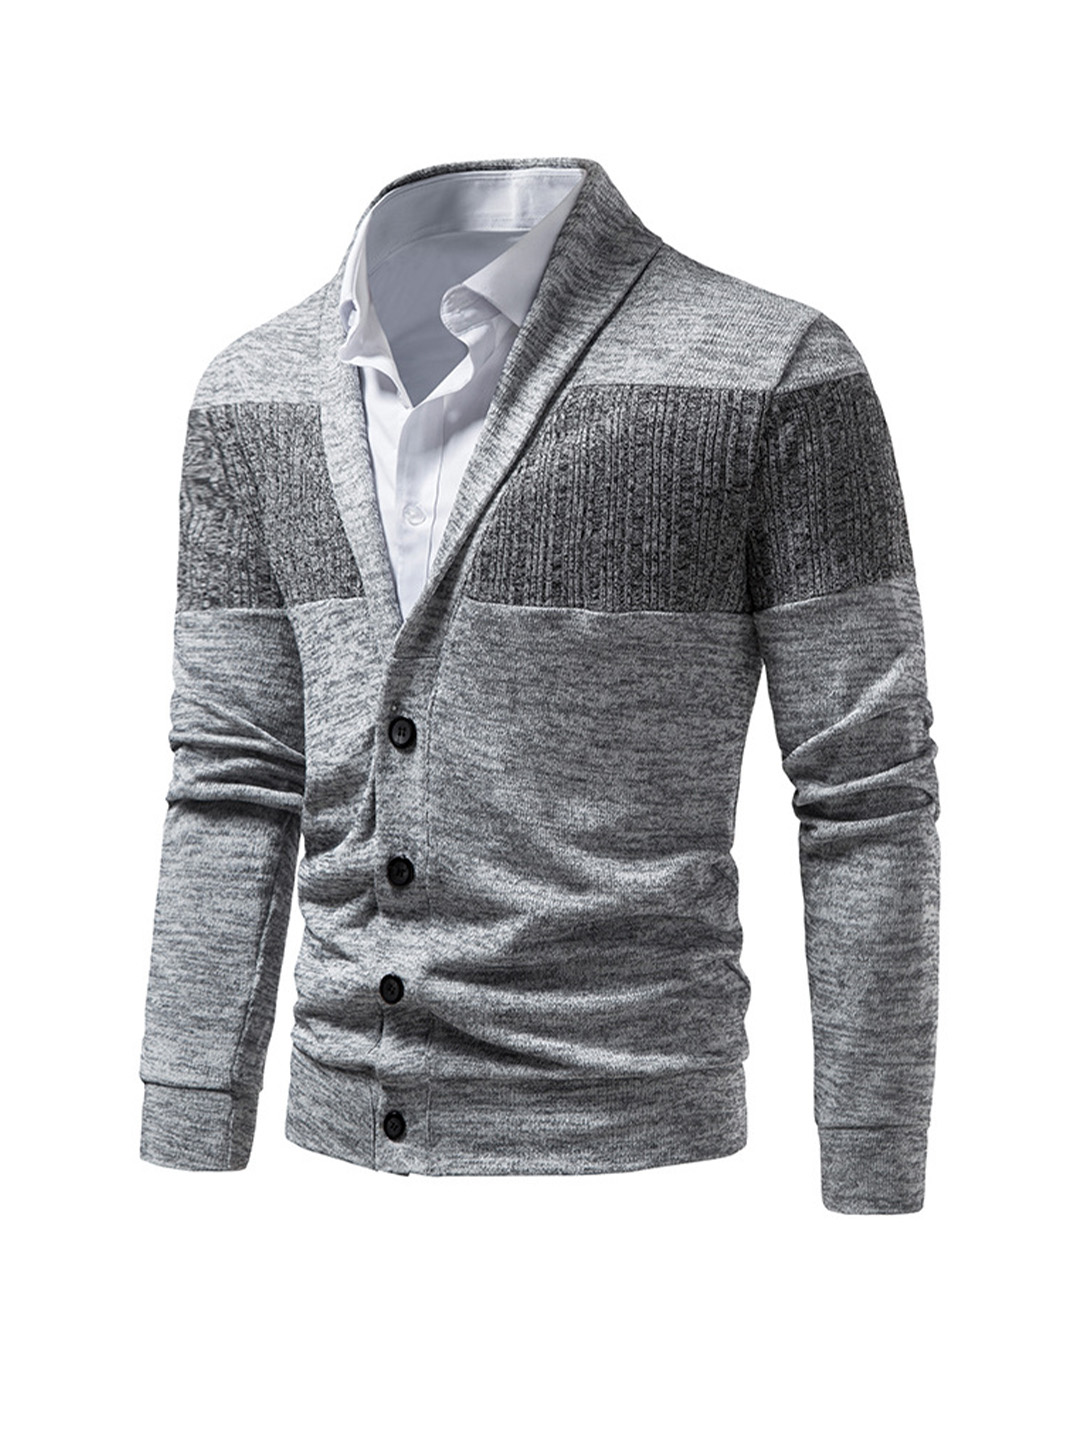 Men's Brent Patchwork Casual Cardigan (shirt not included)-poisonstreetwear.com